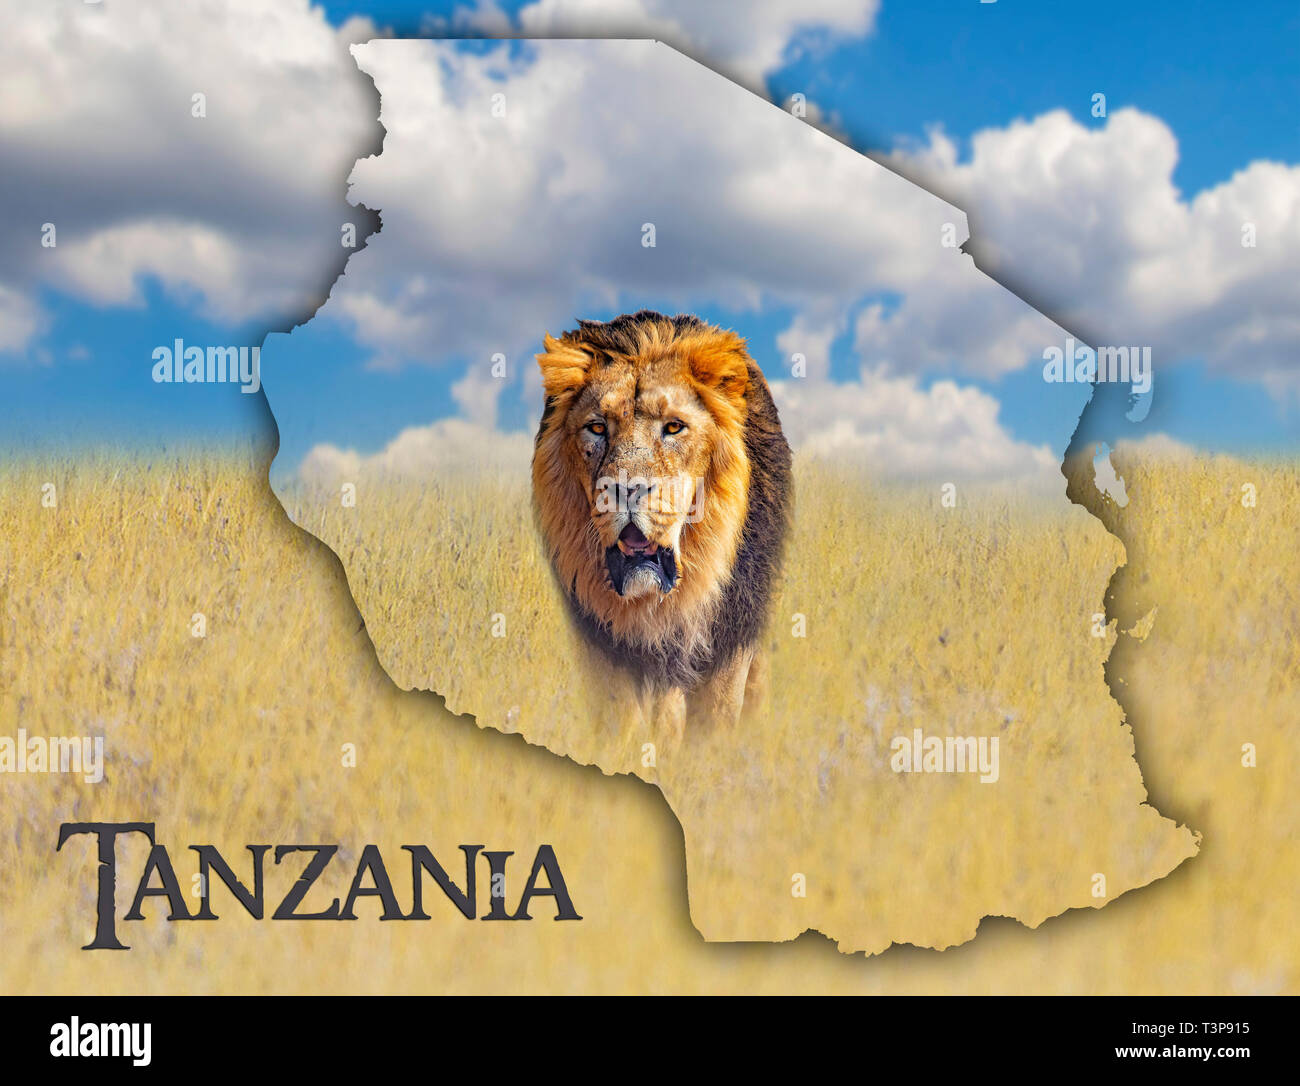 Flag Map of Tanzania on which is a picture of a lion. There is the text of Tanzania. It is national african background with golden grass and blue sky. Stock Photo